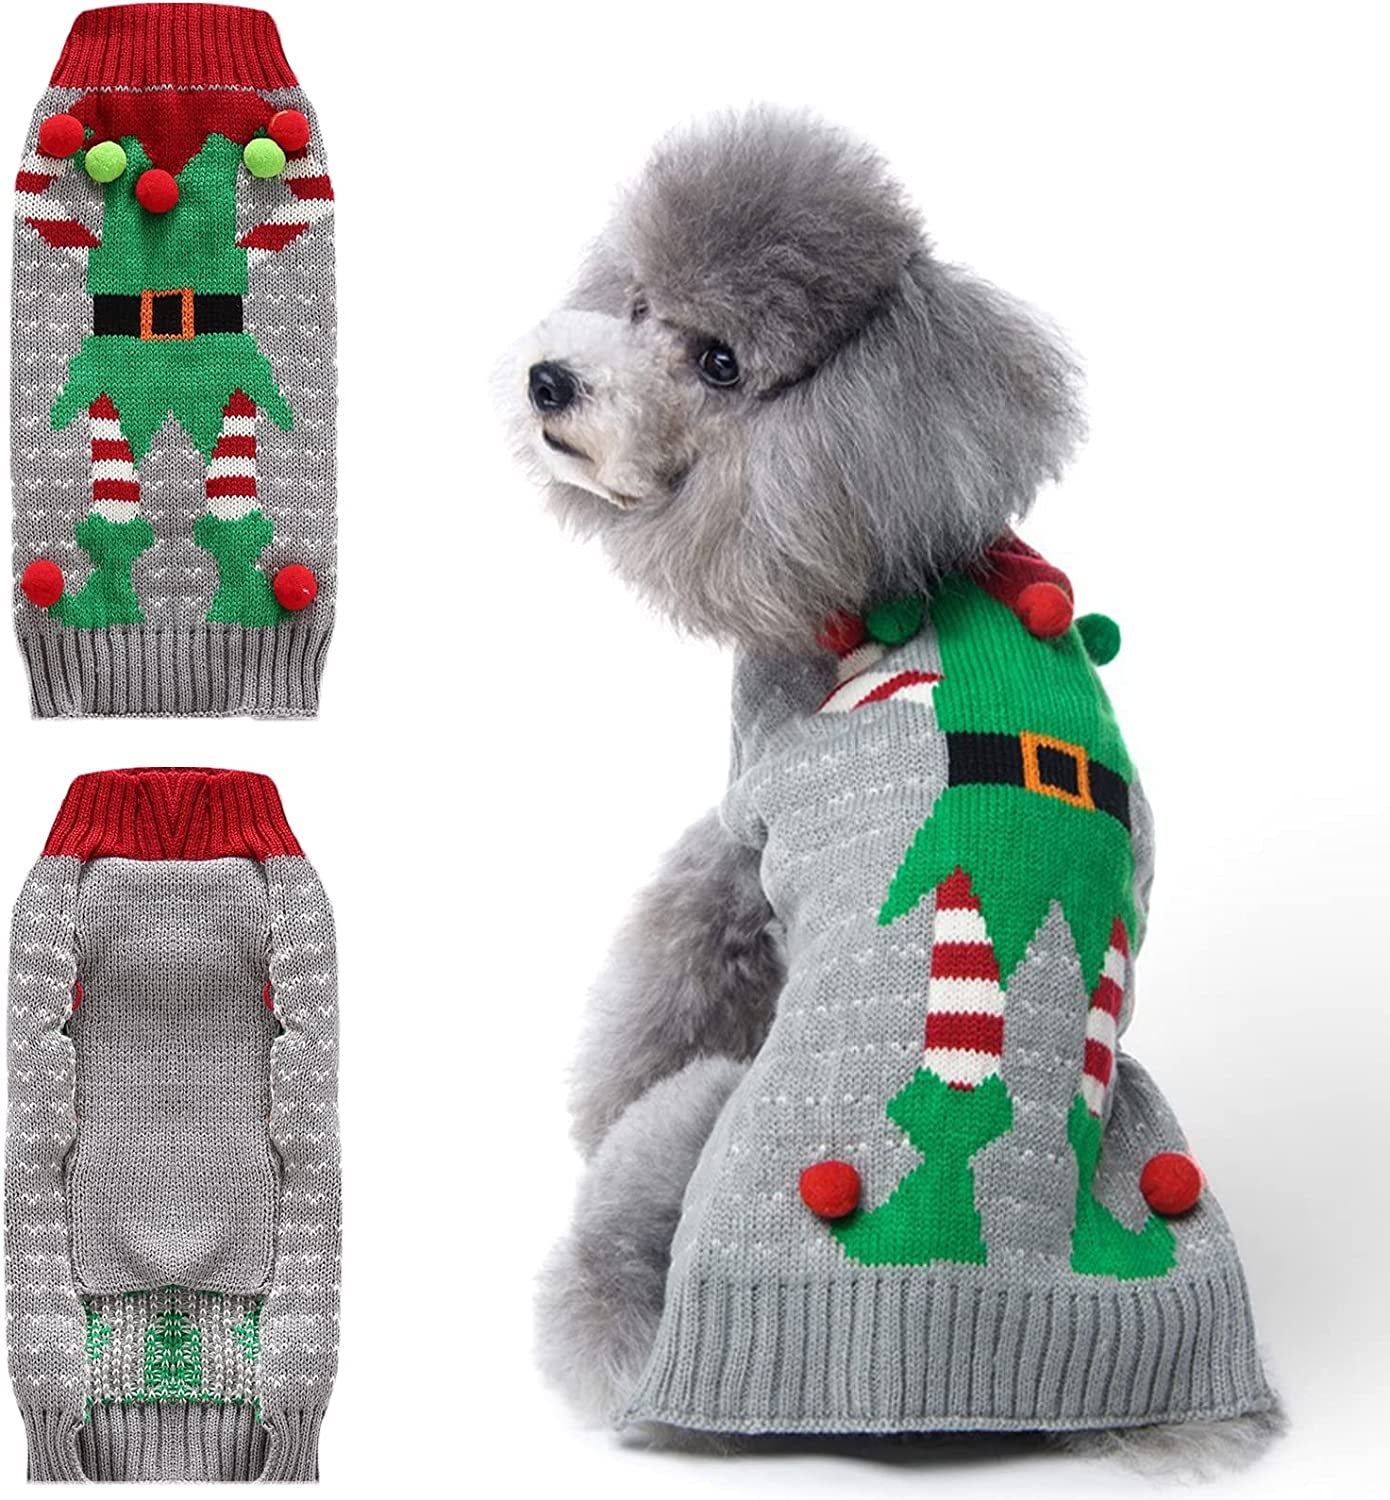 TENGZHI Dog Christmas Sweater Ugly Xmas Puppy Clothes Costume Warm Knitted Cat Outfit Jumper Cute Reindeer Pet Clothing for Small Medium Large Dogs Cats（S,Black） Animals & Pet Supplies > Pet Supplies > Dog Supplies > Dog Apparel Yi Wu Shi Teng Zhi Dian Zi Shang Wu You Xian Gong Si Gray Clown Small 